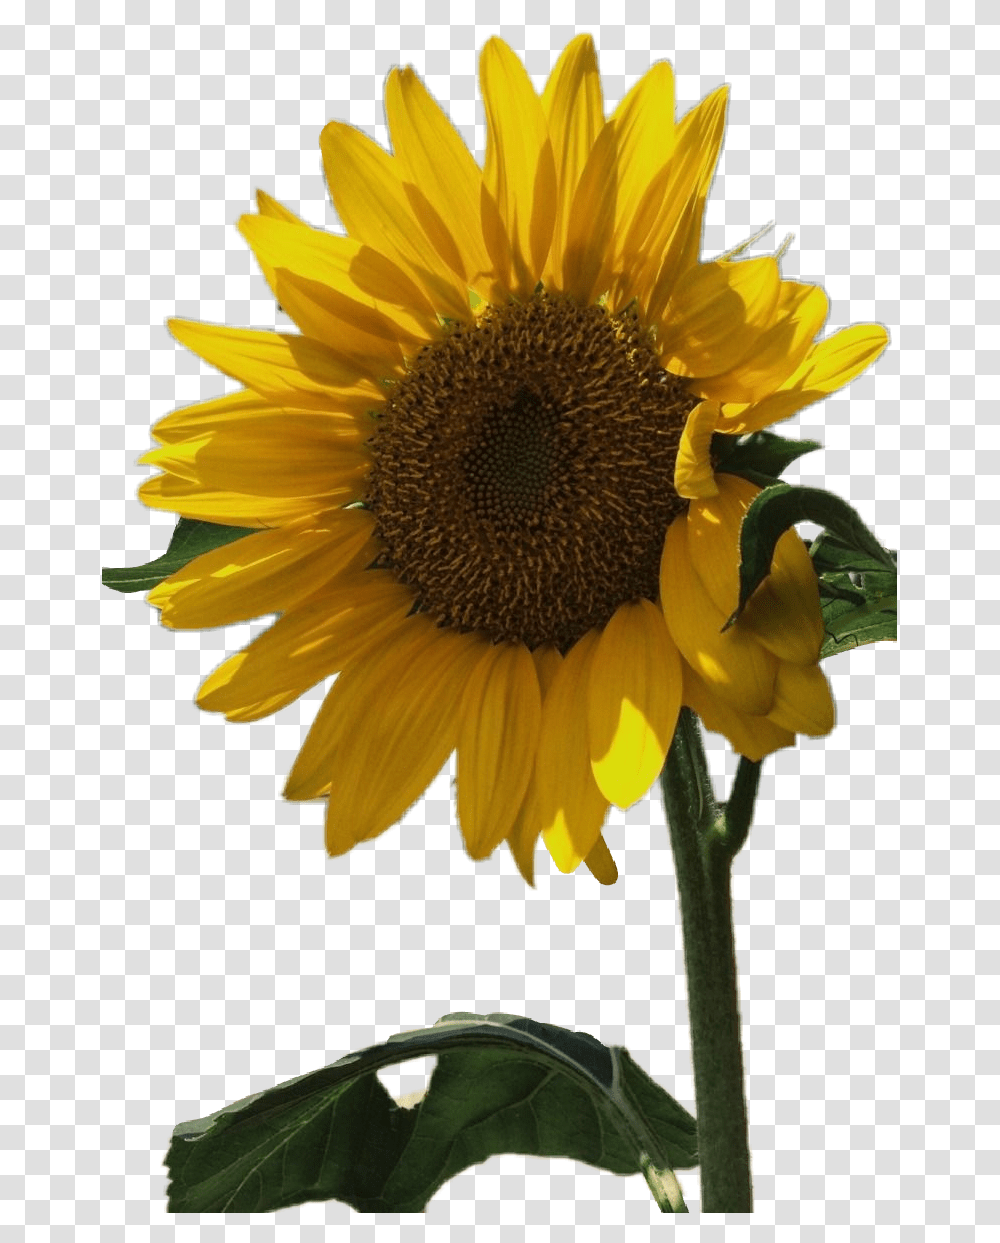 Sunflower Aesthetic Tumblr Yellow Flower Floral Yellow, Plant, Blossom, Daisy, Daisies Transparent Png